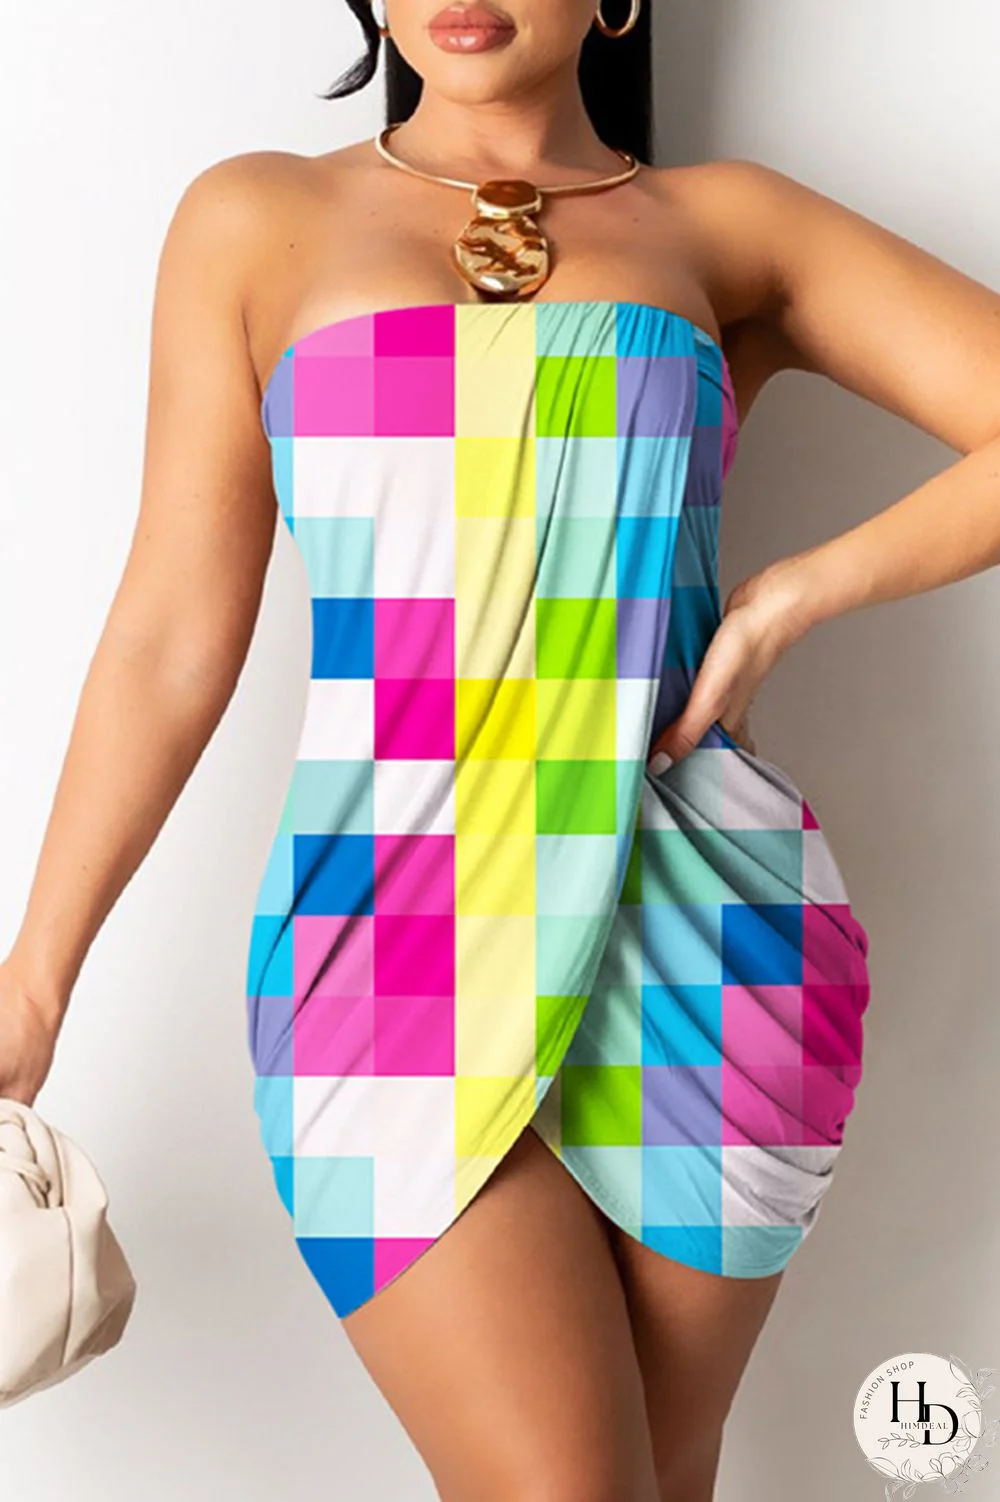 Colour Sexy Print Patchwork Backless Strapless Sleeveless Dress Dresses